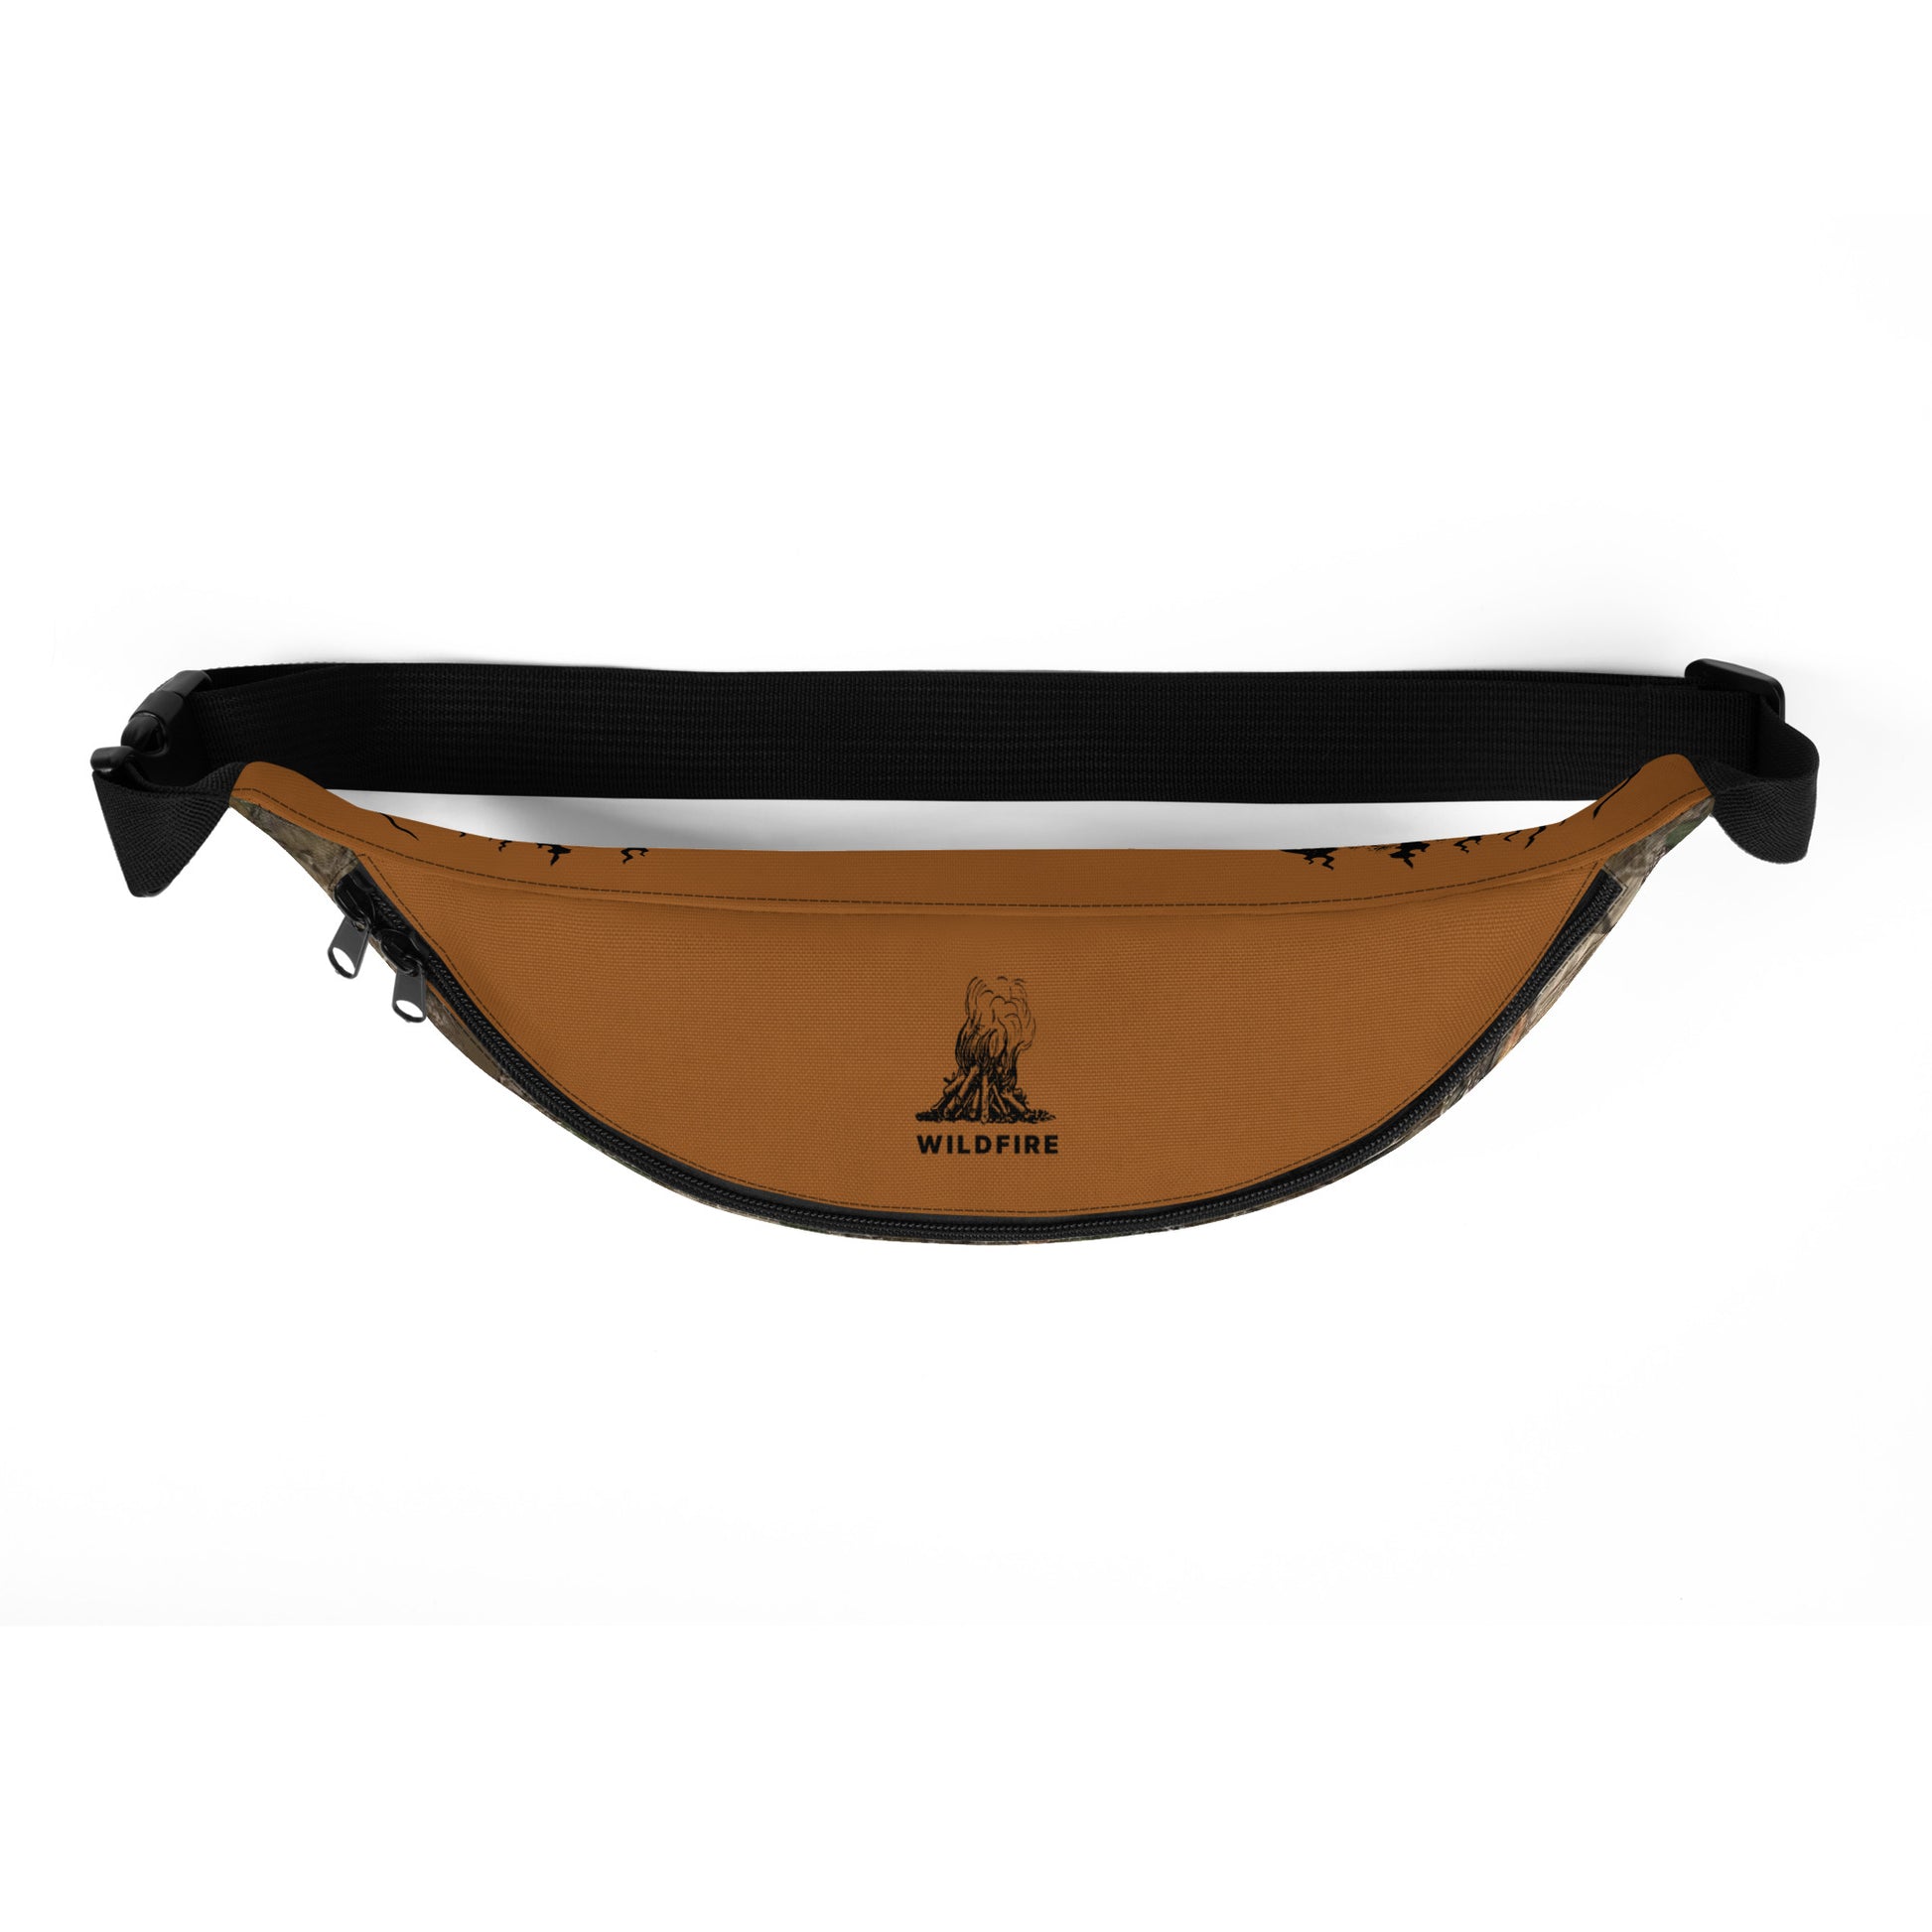 Wildfire Cigars retro fanny pack in brown